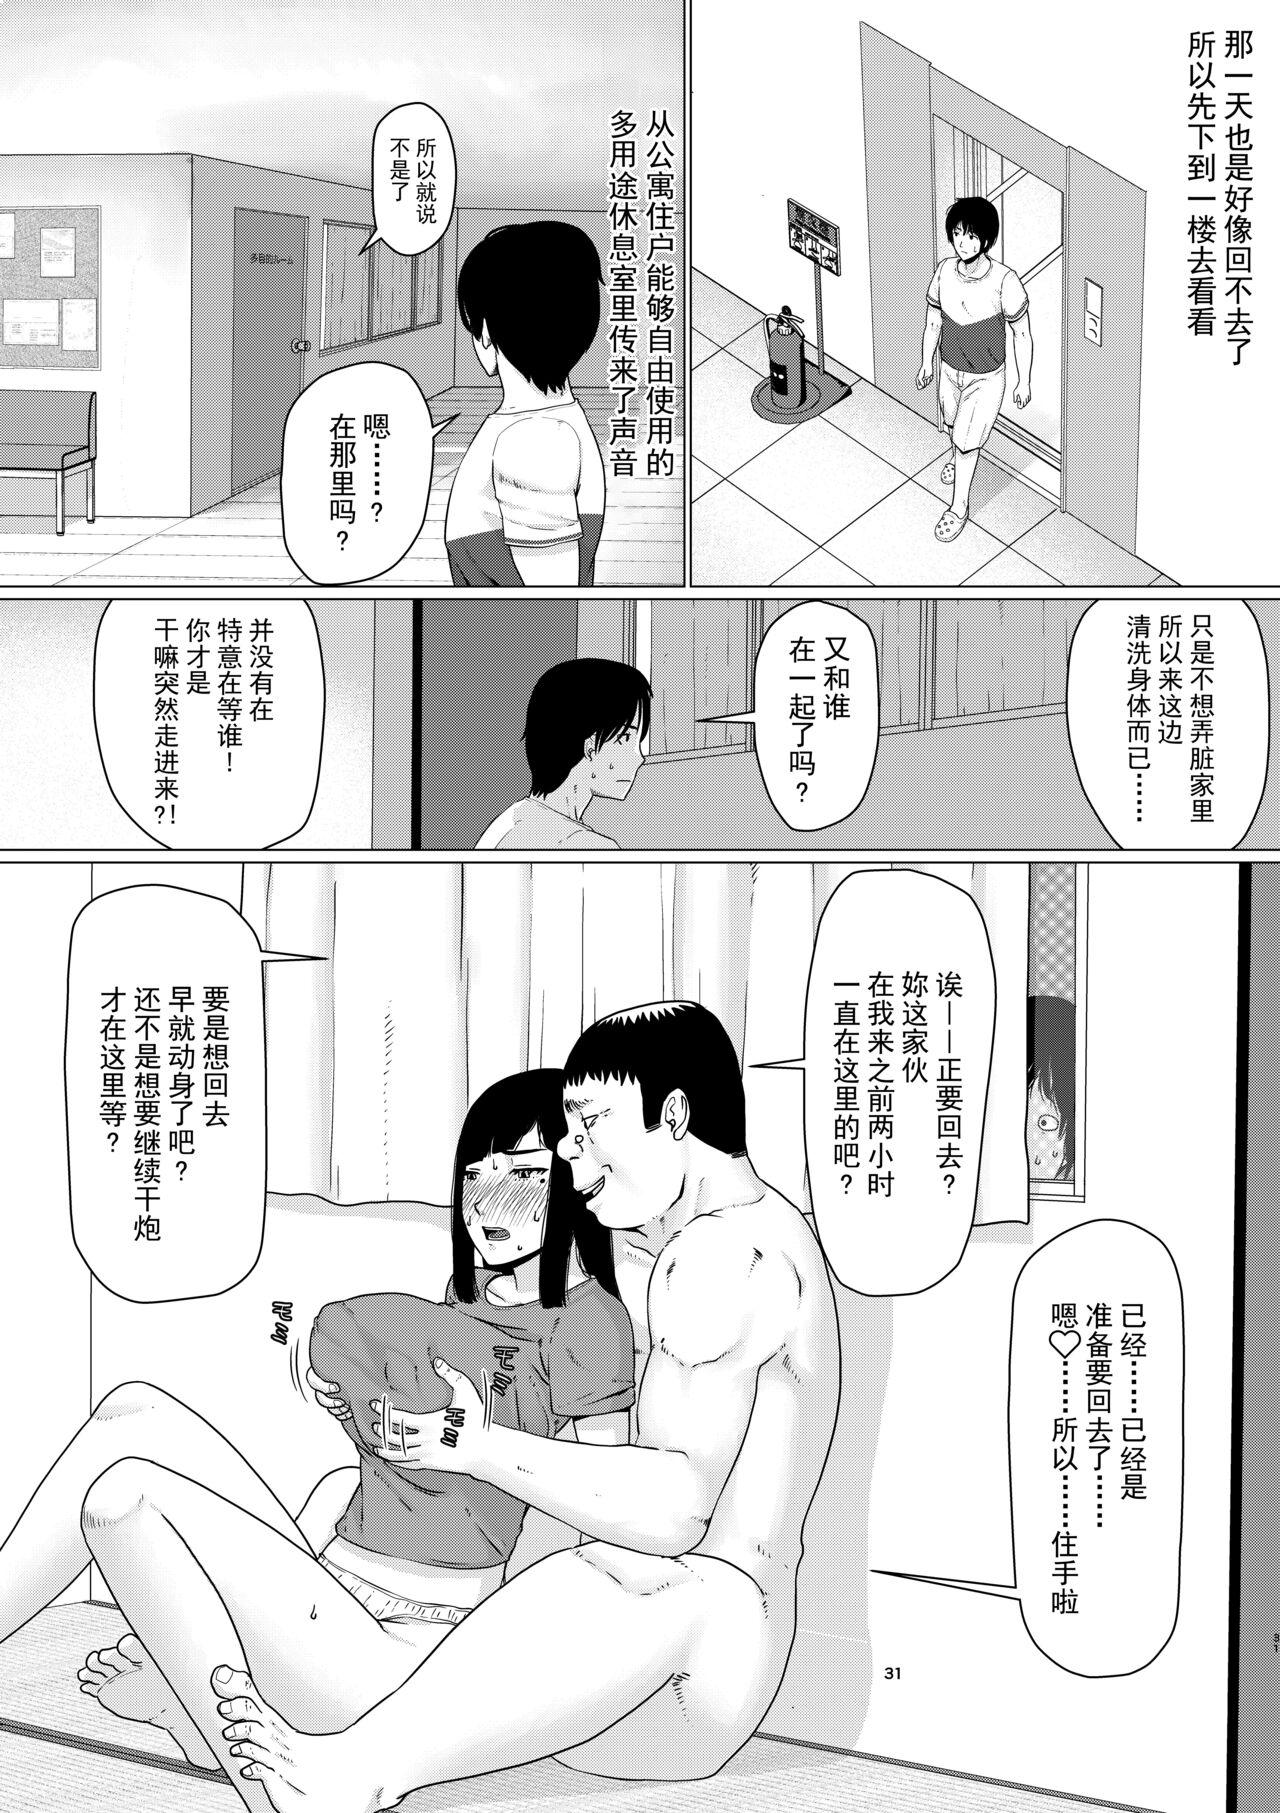 (Dōjinshi) Chieri can't lose!3 -Perverted toilet wife who fertilizes anyone's sperm with her husband's approval- Volume 1 (Original) [Chinese][超勇漢化組] 31